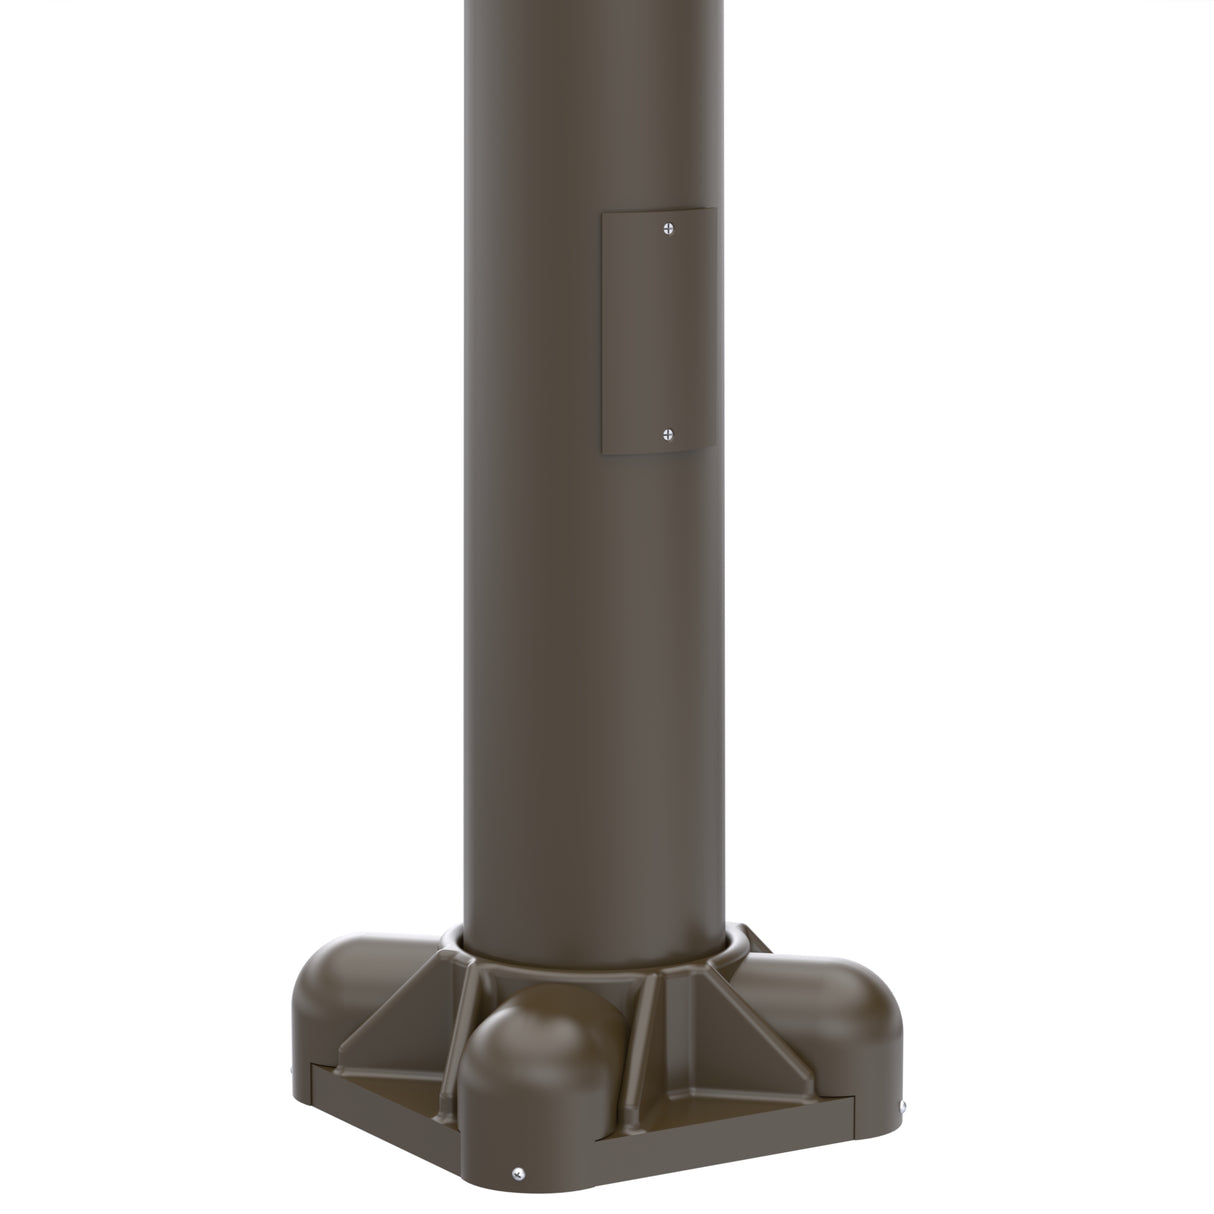 14' Tall x 5.0" Base OD x 3.0" Top OD x 0.156" Thick, Round Tapered Aluminum, Anchor Base Light Pole